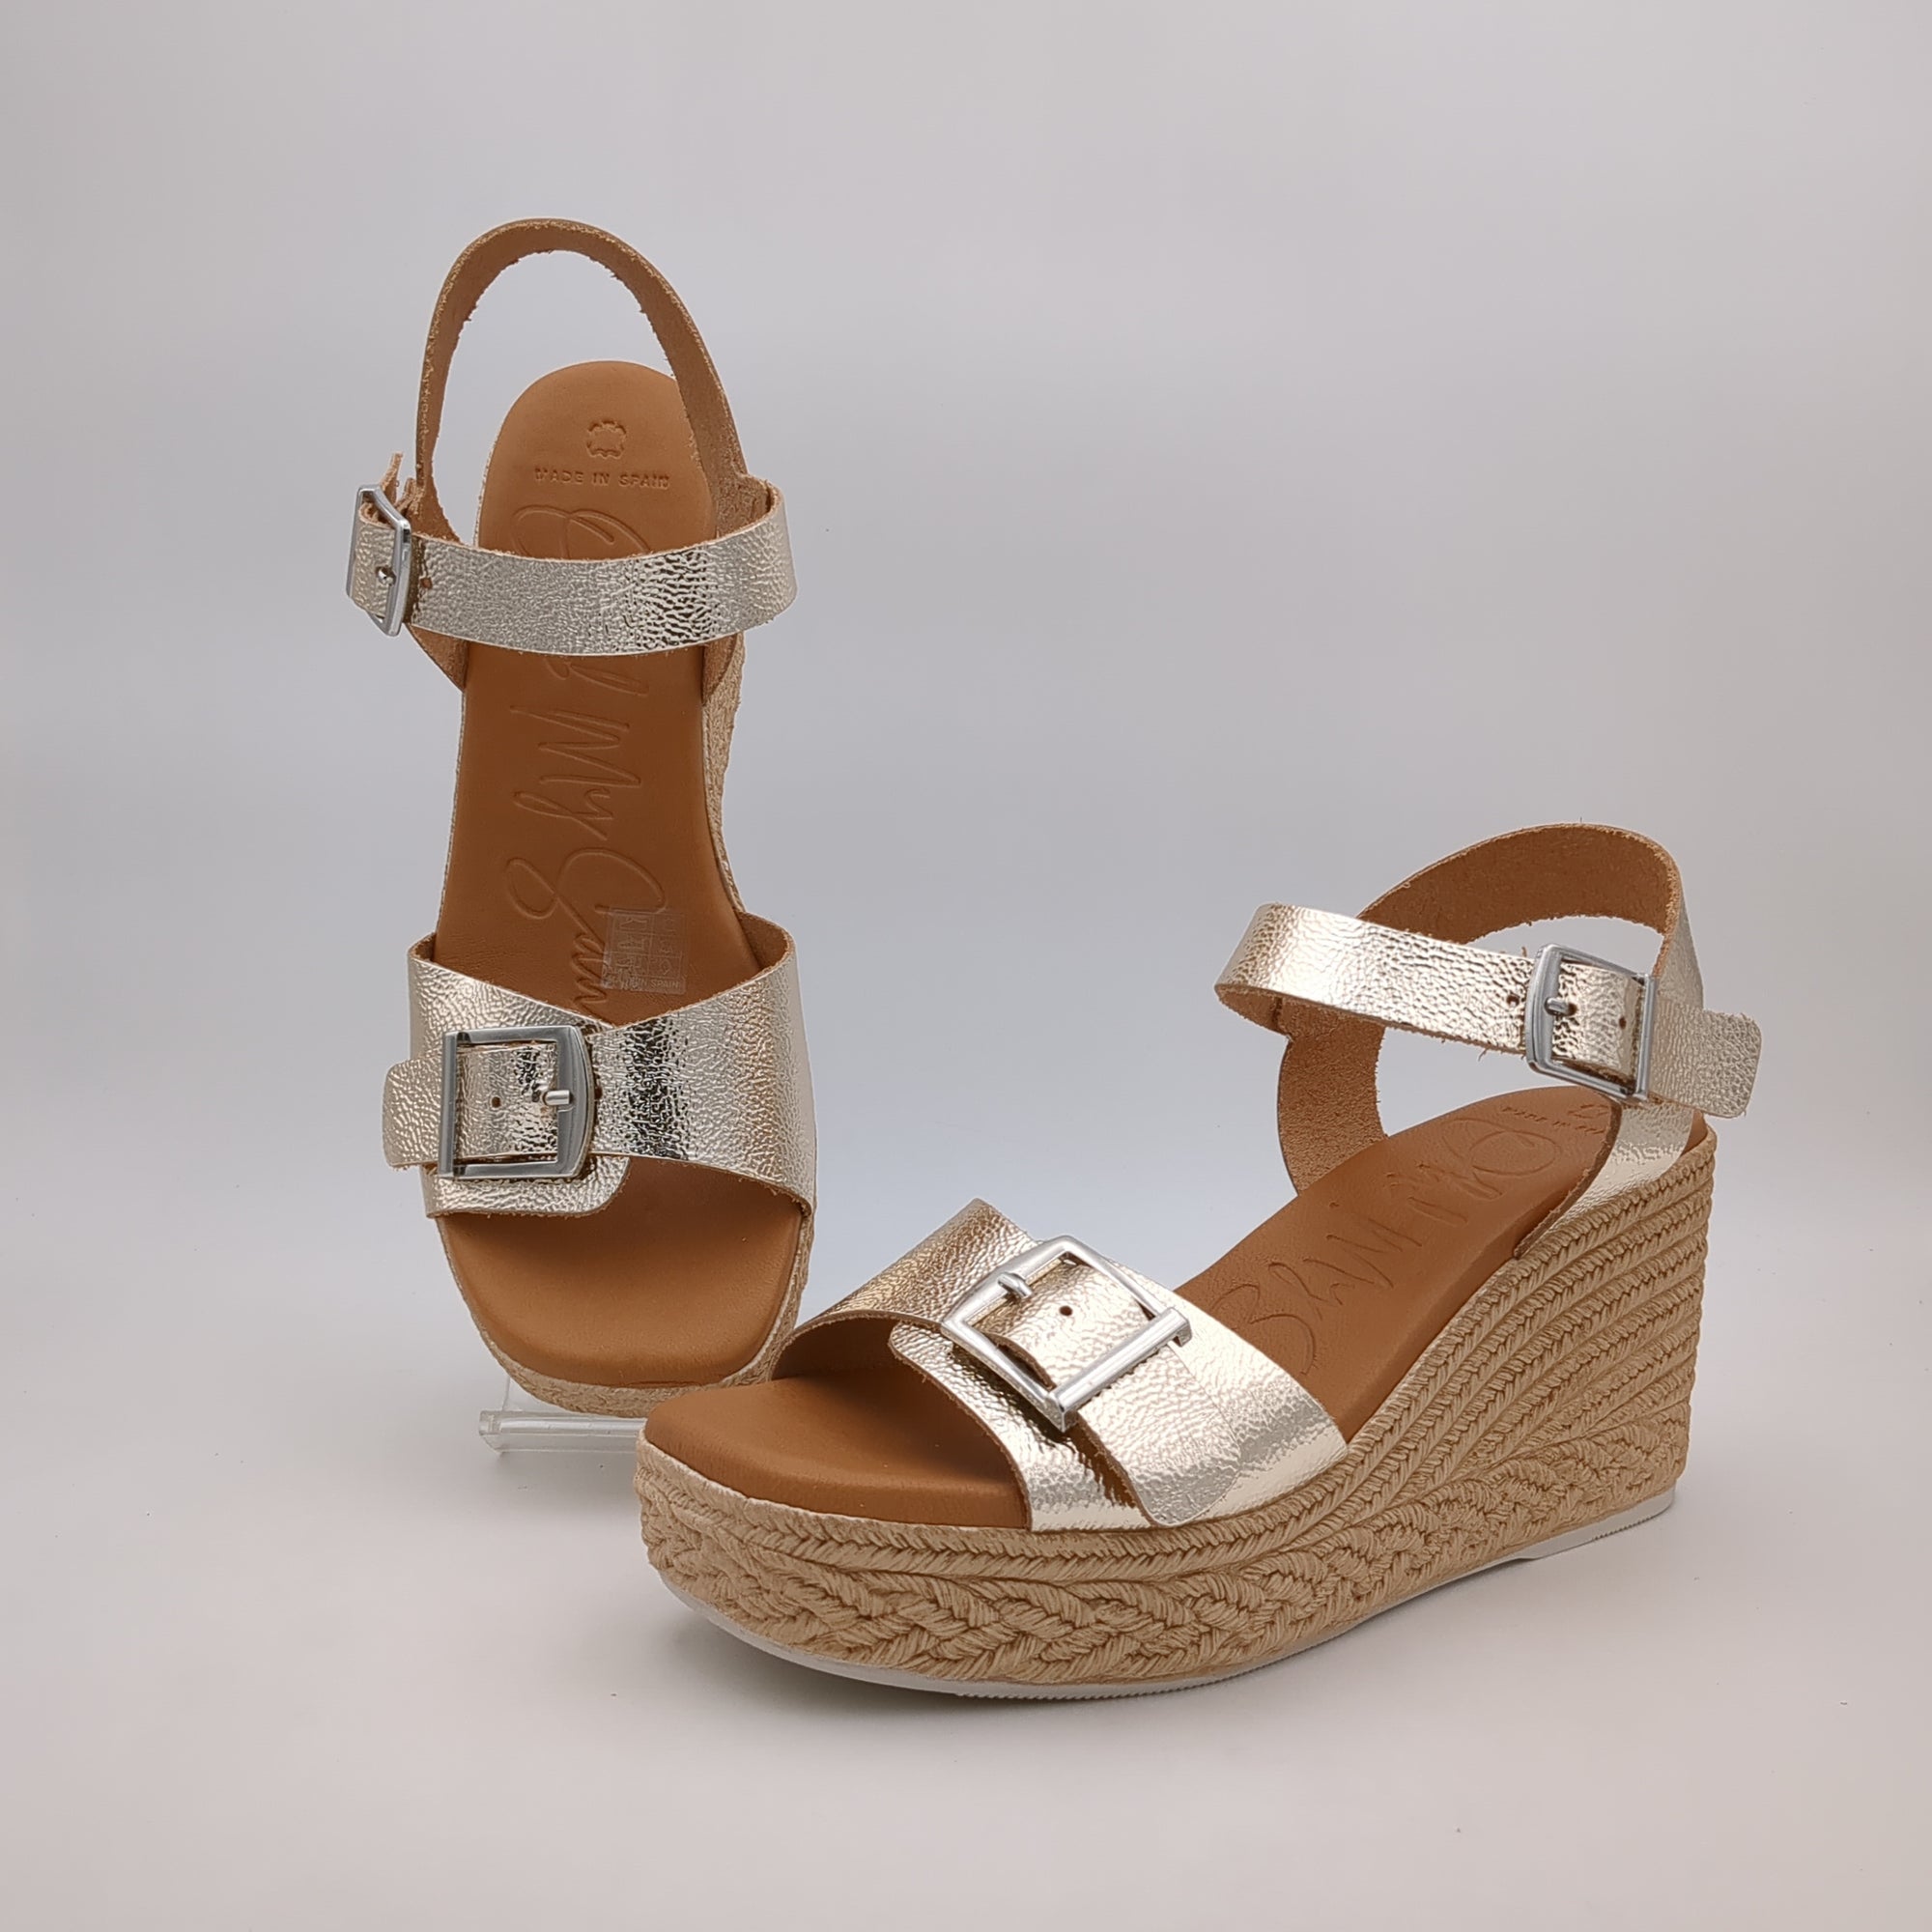 Back view with the strap and buckle detail of Oh My Sandals 5459.